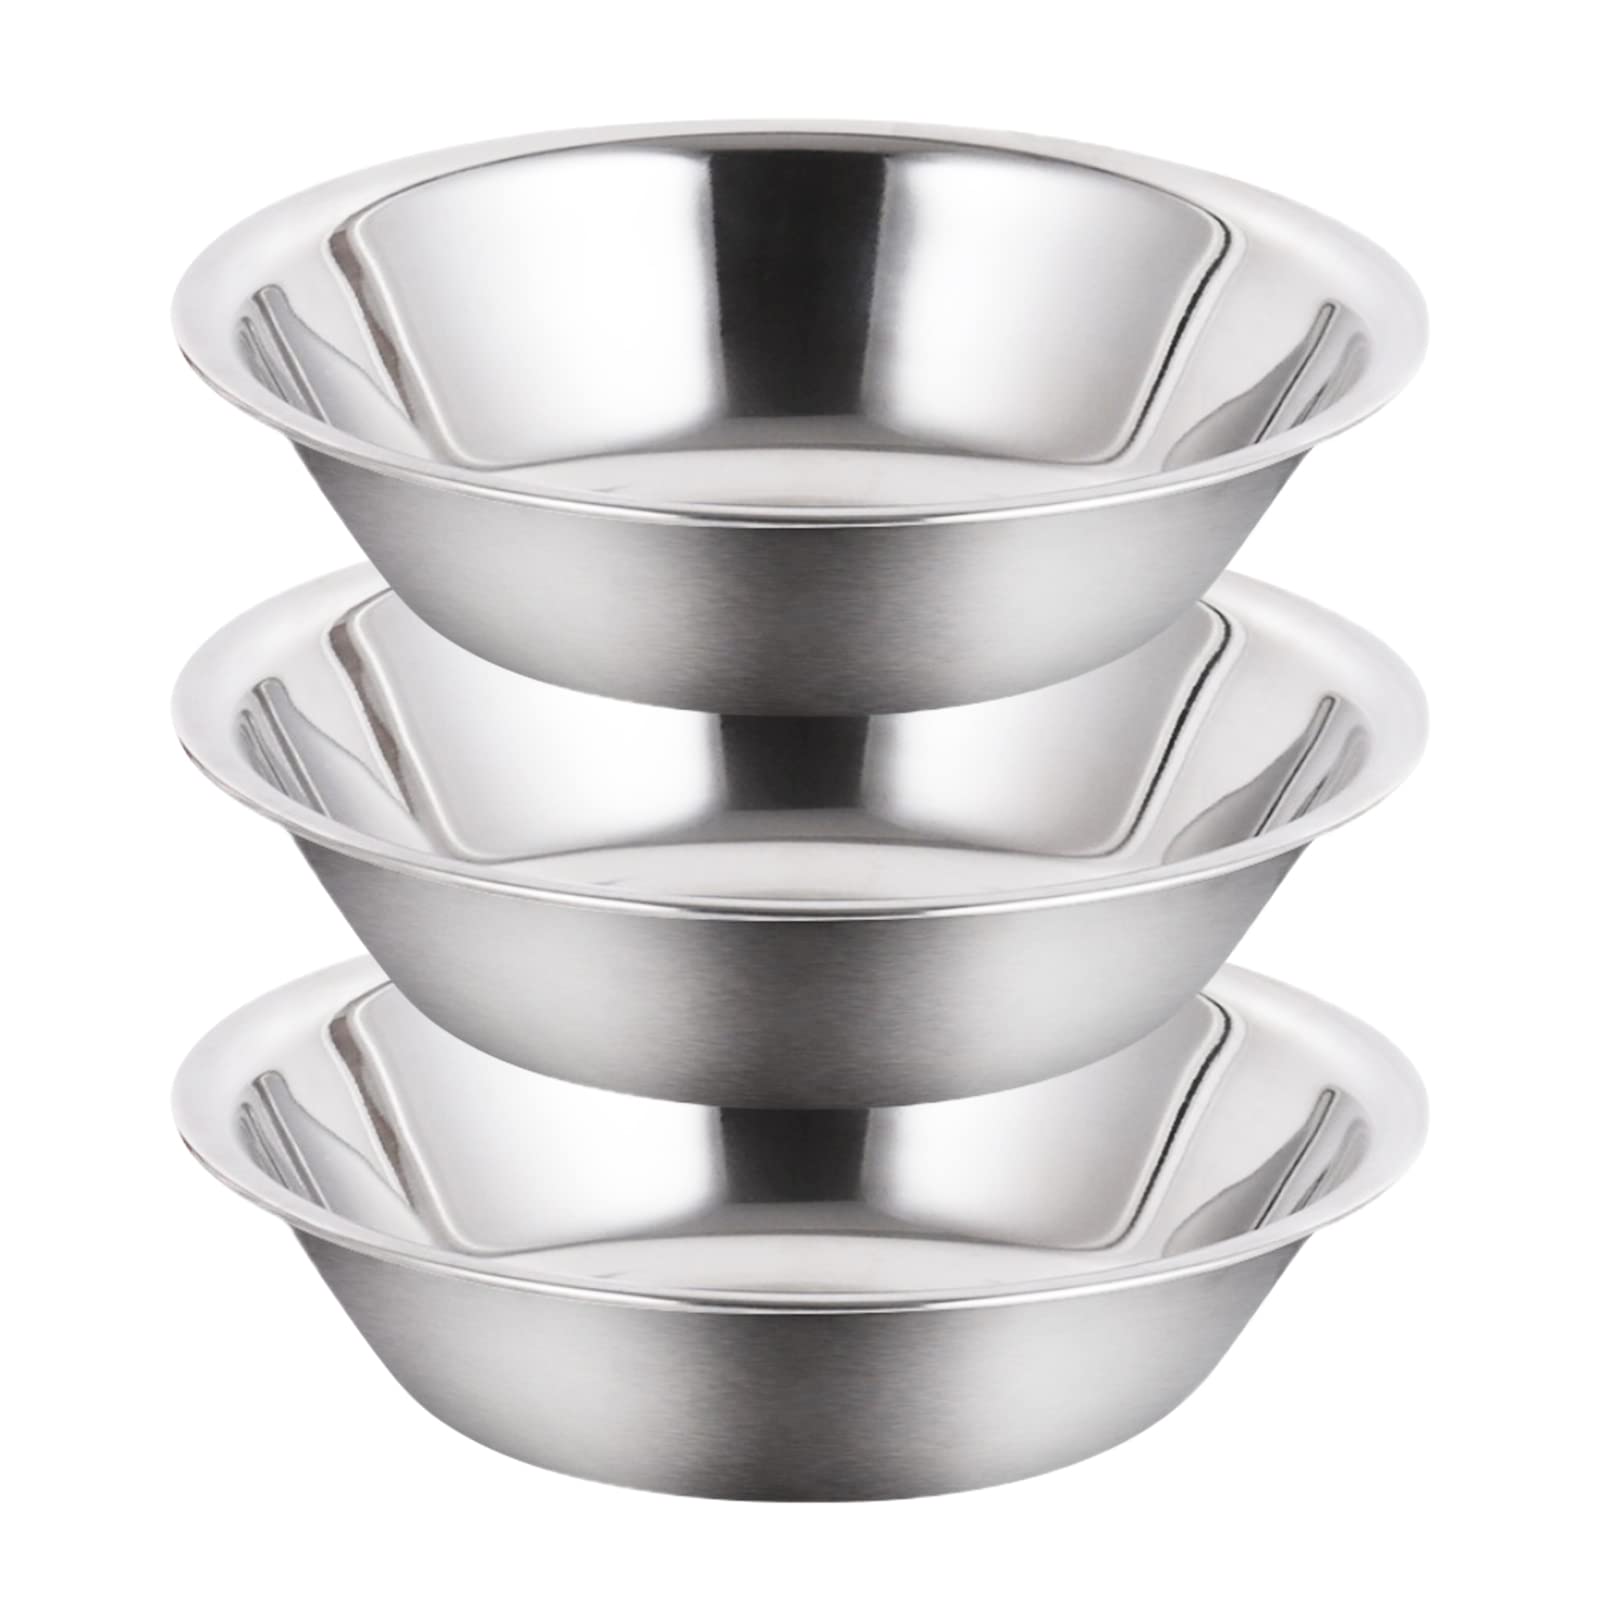 ASIBT Commercial Restaurant Mixing Bowl